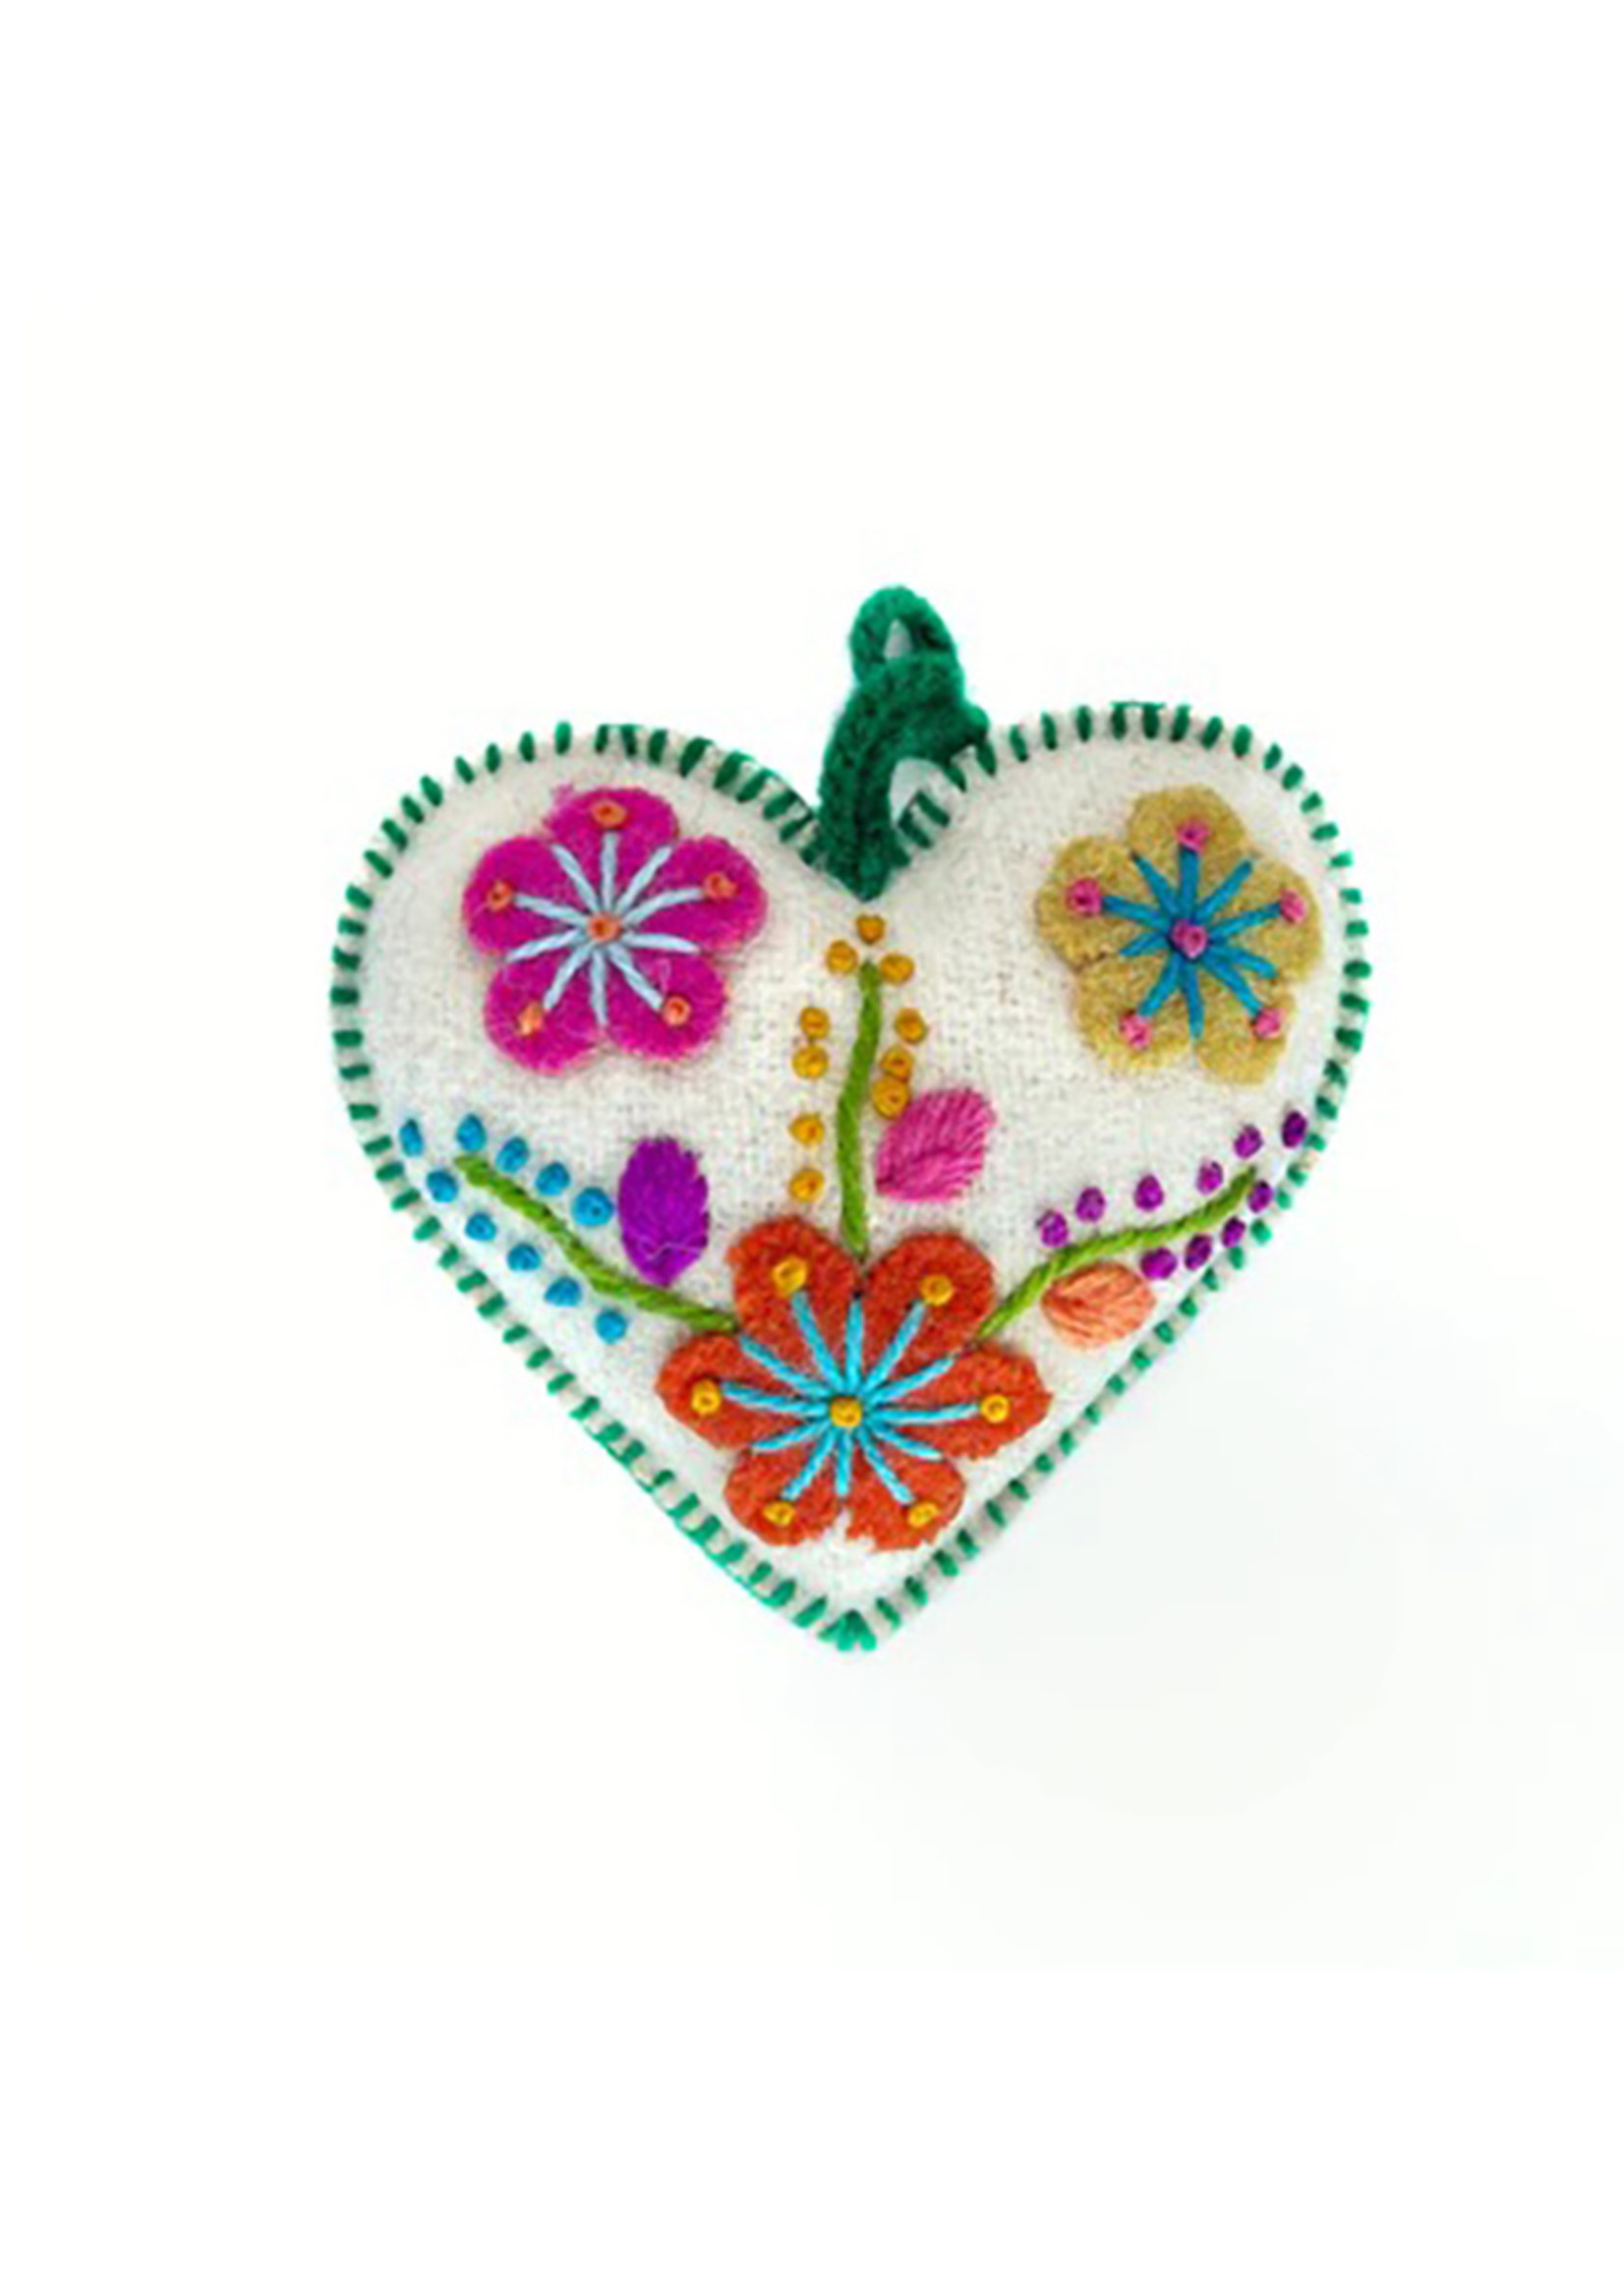 Ornaments 4 Orphans Colorful Flower Heart Ornament